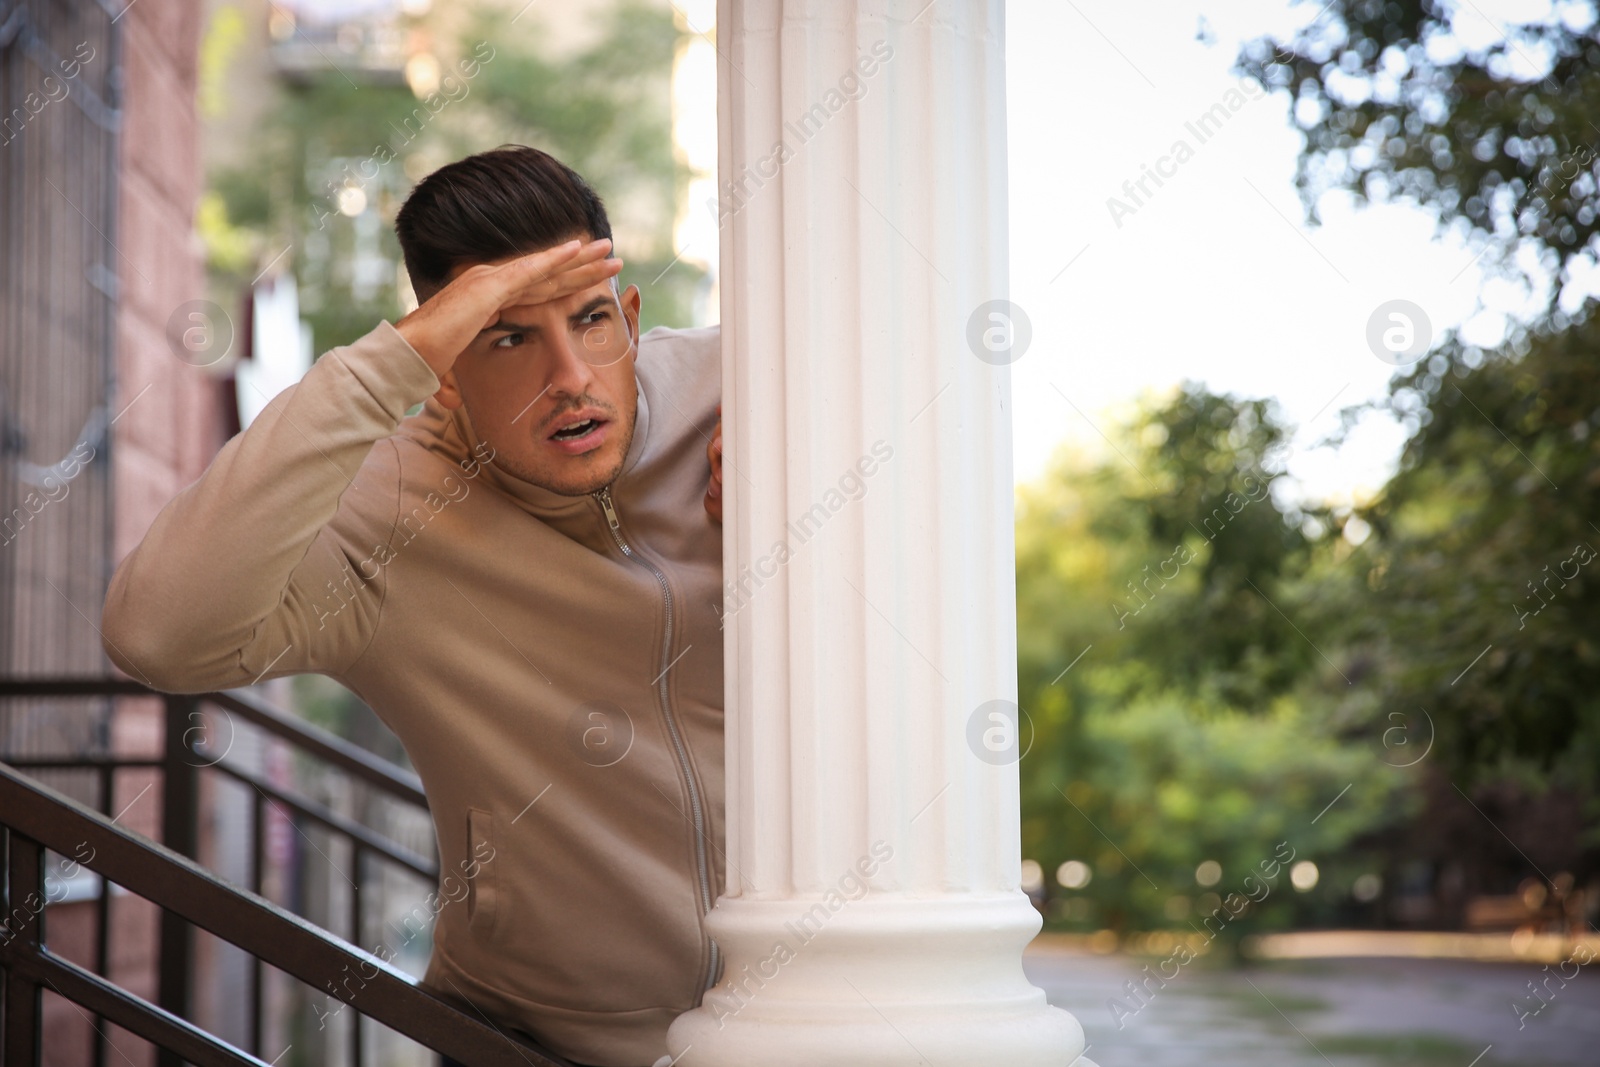 Photo of Jealous man spying on ex girlfriend outdoors